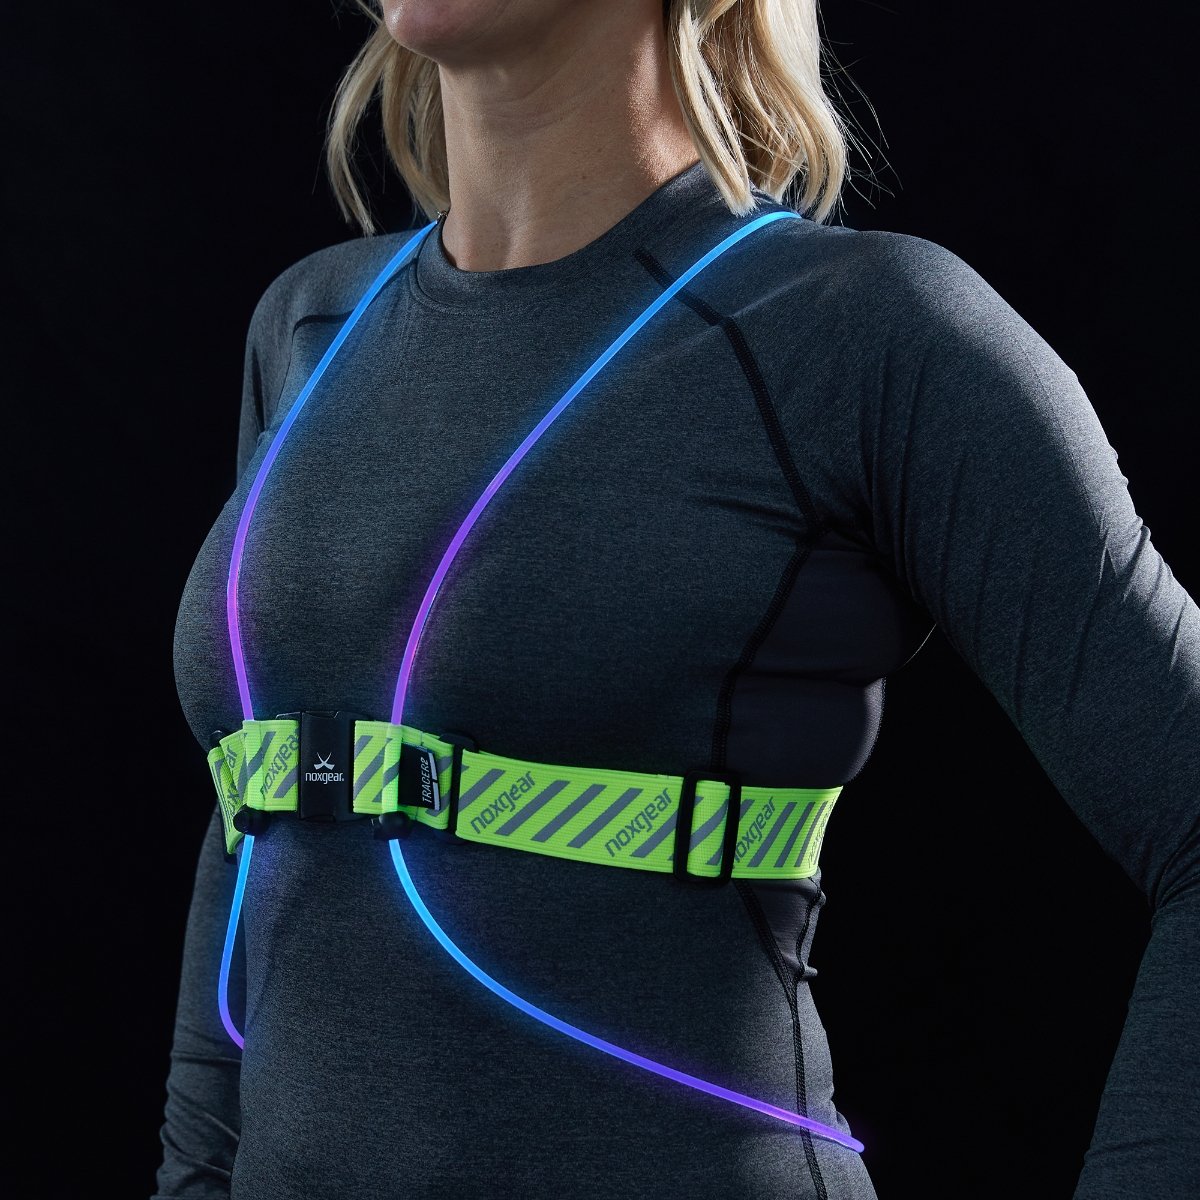 FREEMOVE Reflective Vest - Running Gear + 2 Bands & Bag/Ultralight & Comfy  Safety Vests for Running, Walking, Cycling